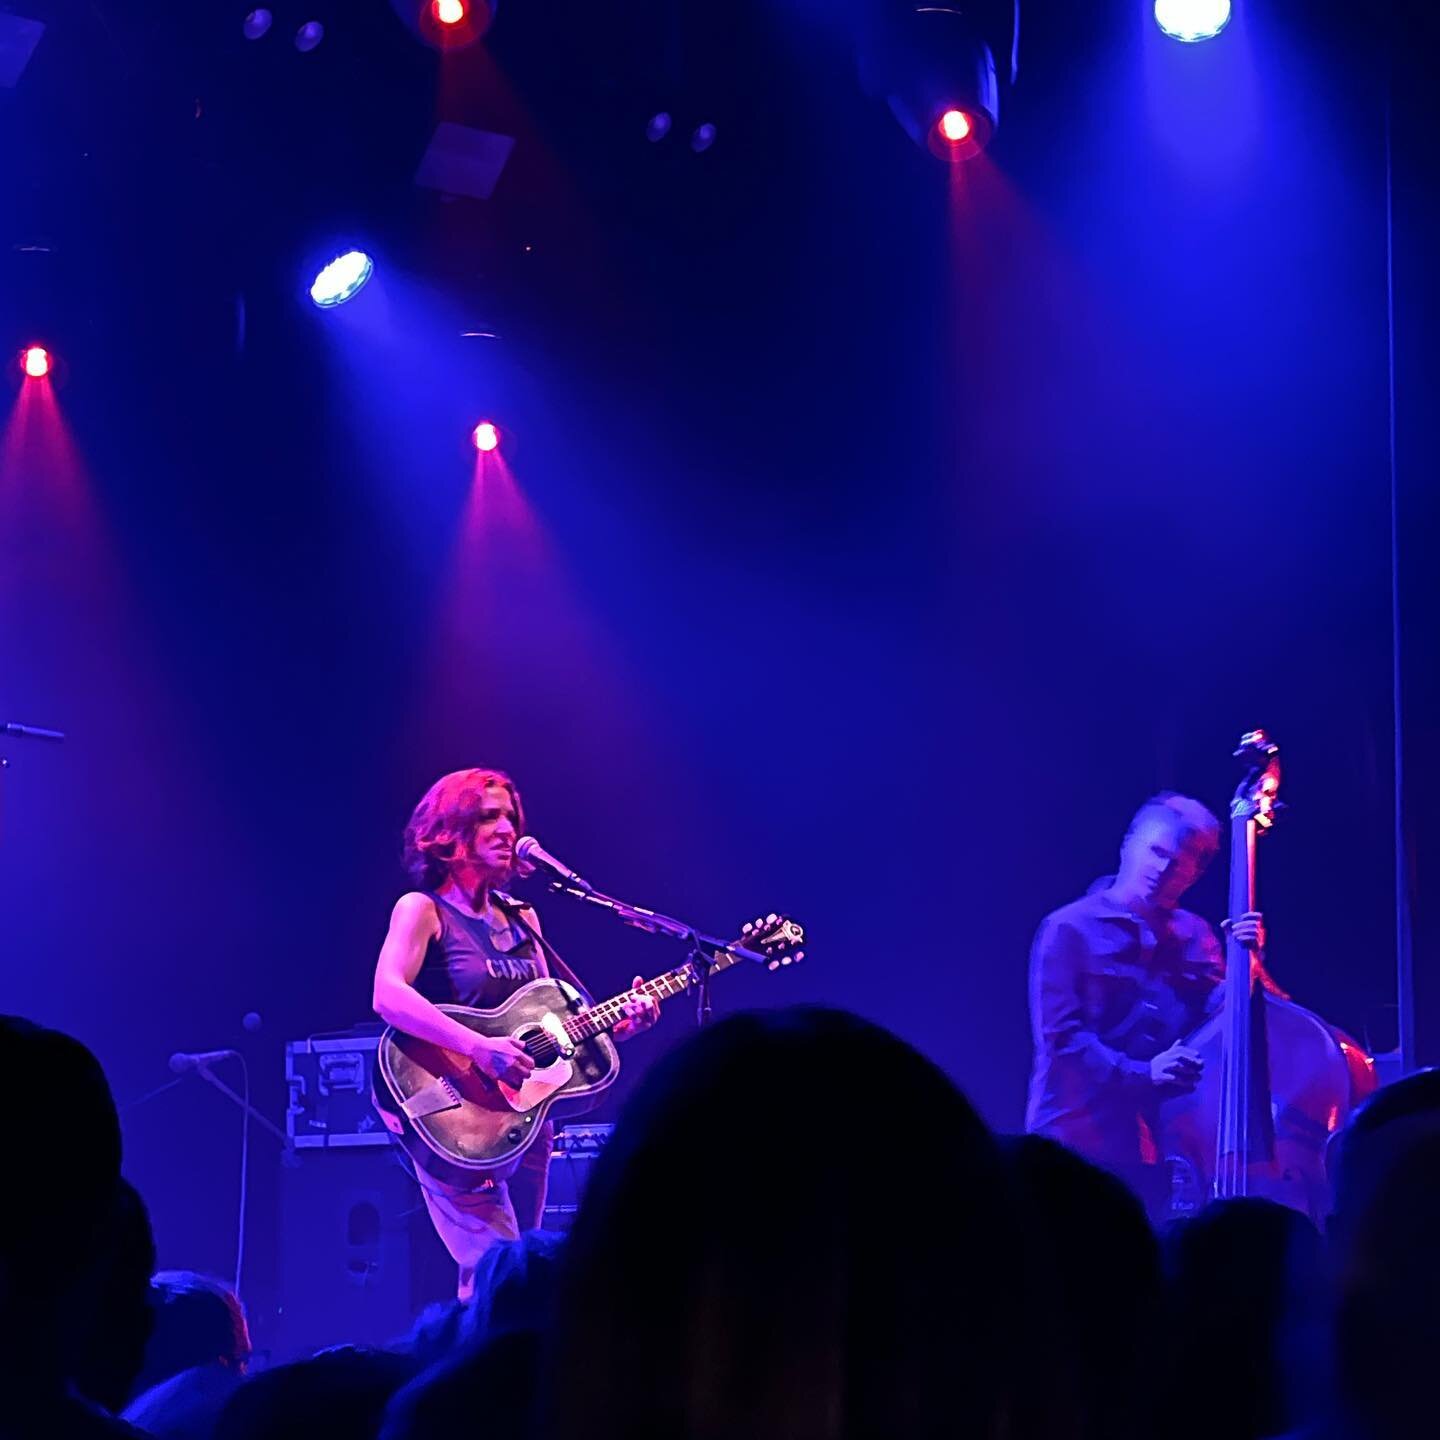 Re-lived my best 90&rsquo;s lesbian life last night. Saw Ani DiFranco live for the first time in oh 20 years. She&rsquo;s still amazing. Thanks for joining me and be you @mindytsonaschoi 

#anidifranco #boston #livemusic